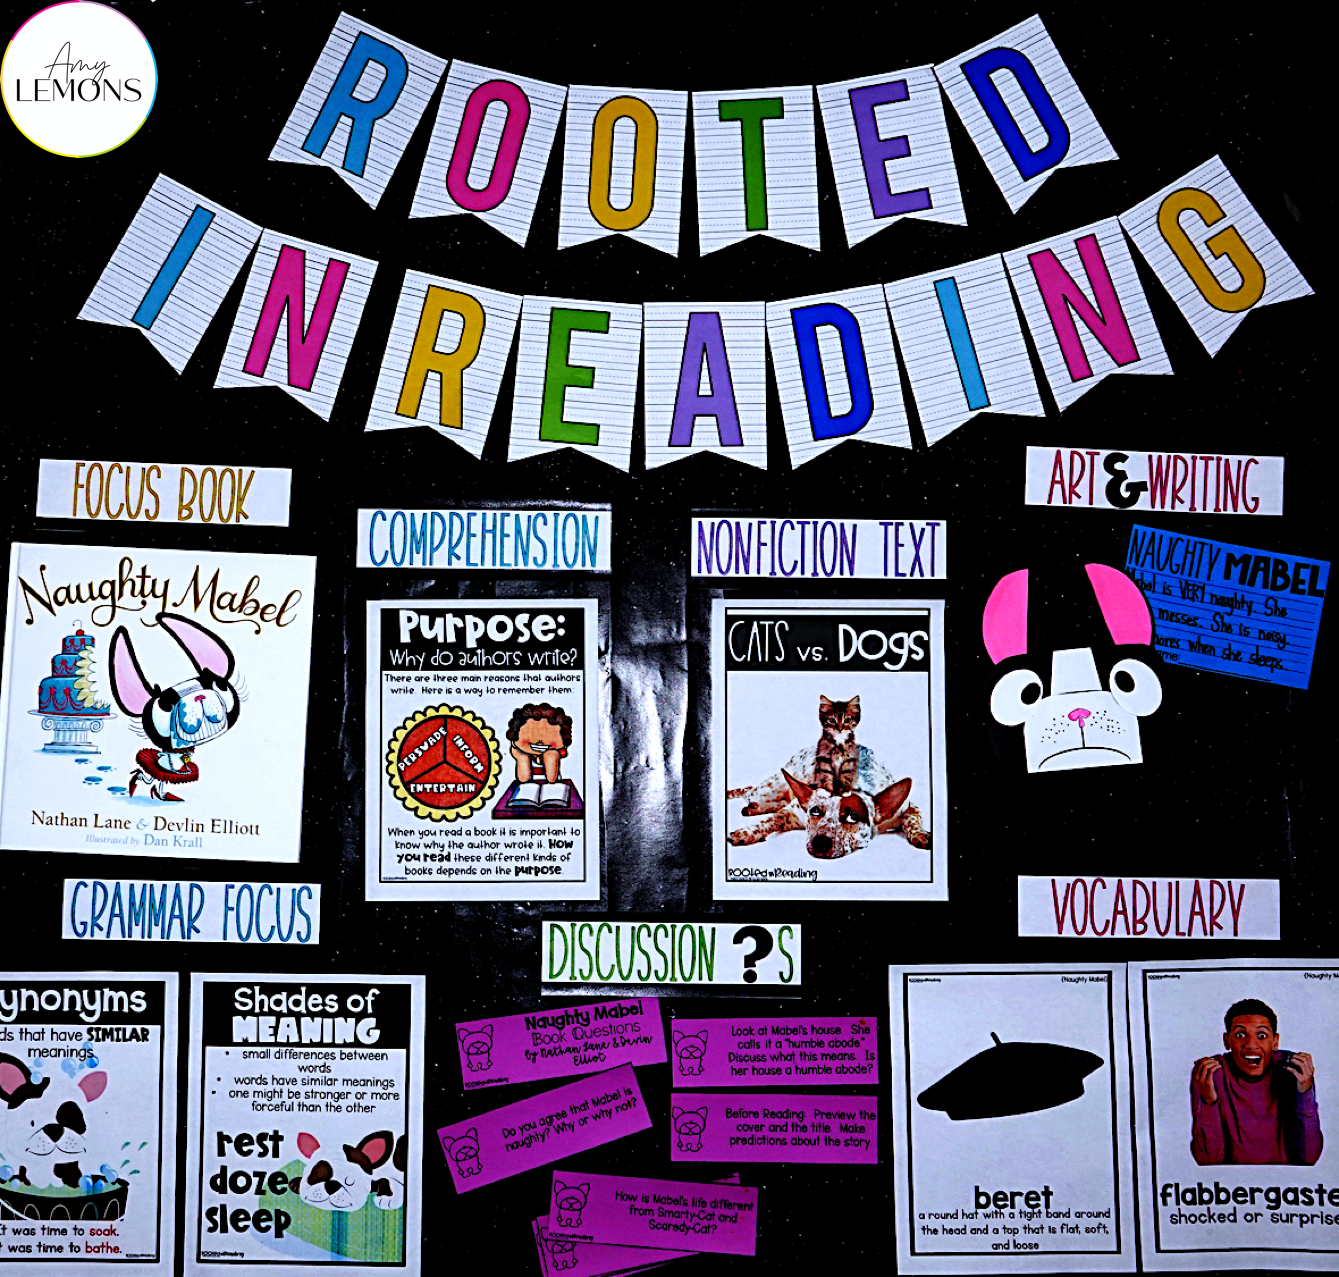 Teachers prepare for back to school with a rooted in reading focus bulletin board including categories for the focus book, comprehension, art, writing, grammar, and more